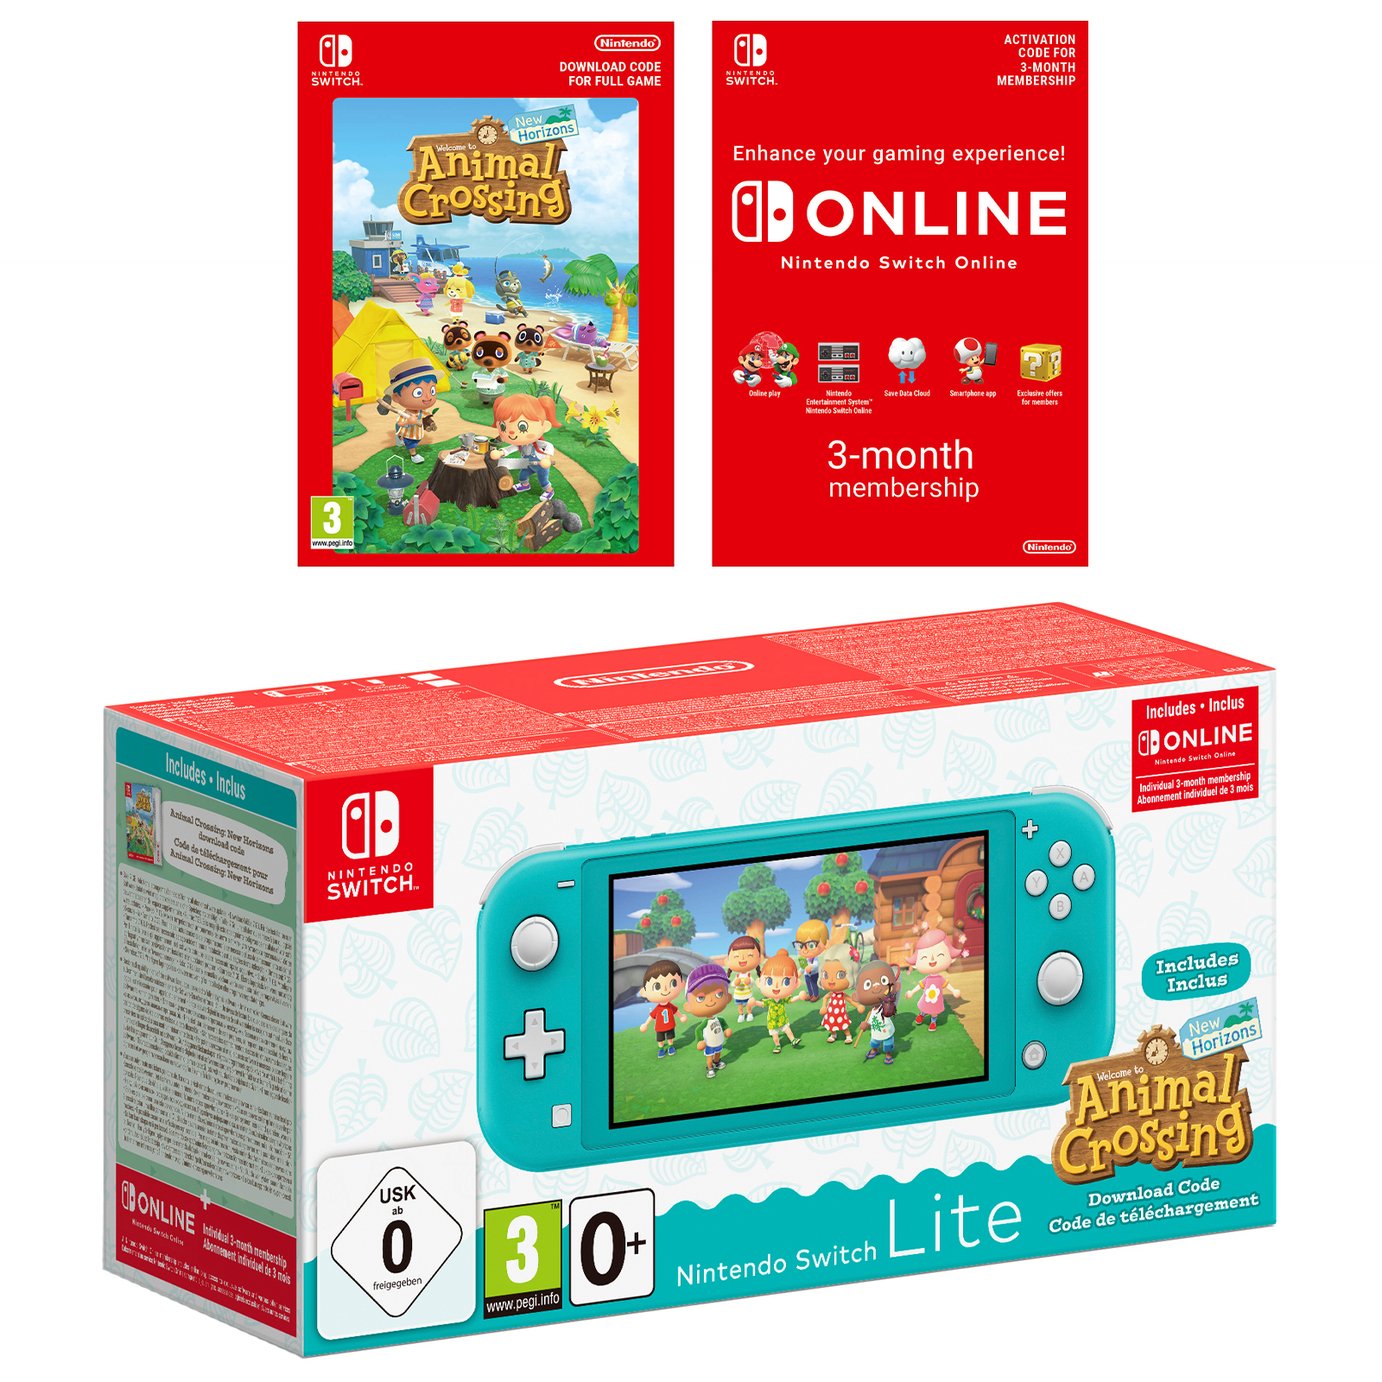 nintendo switch lite can you play animal crossing